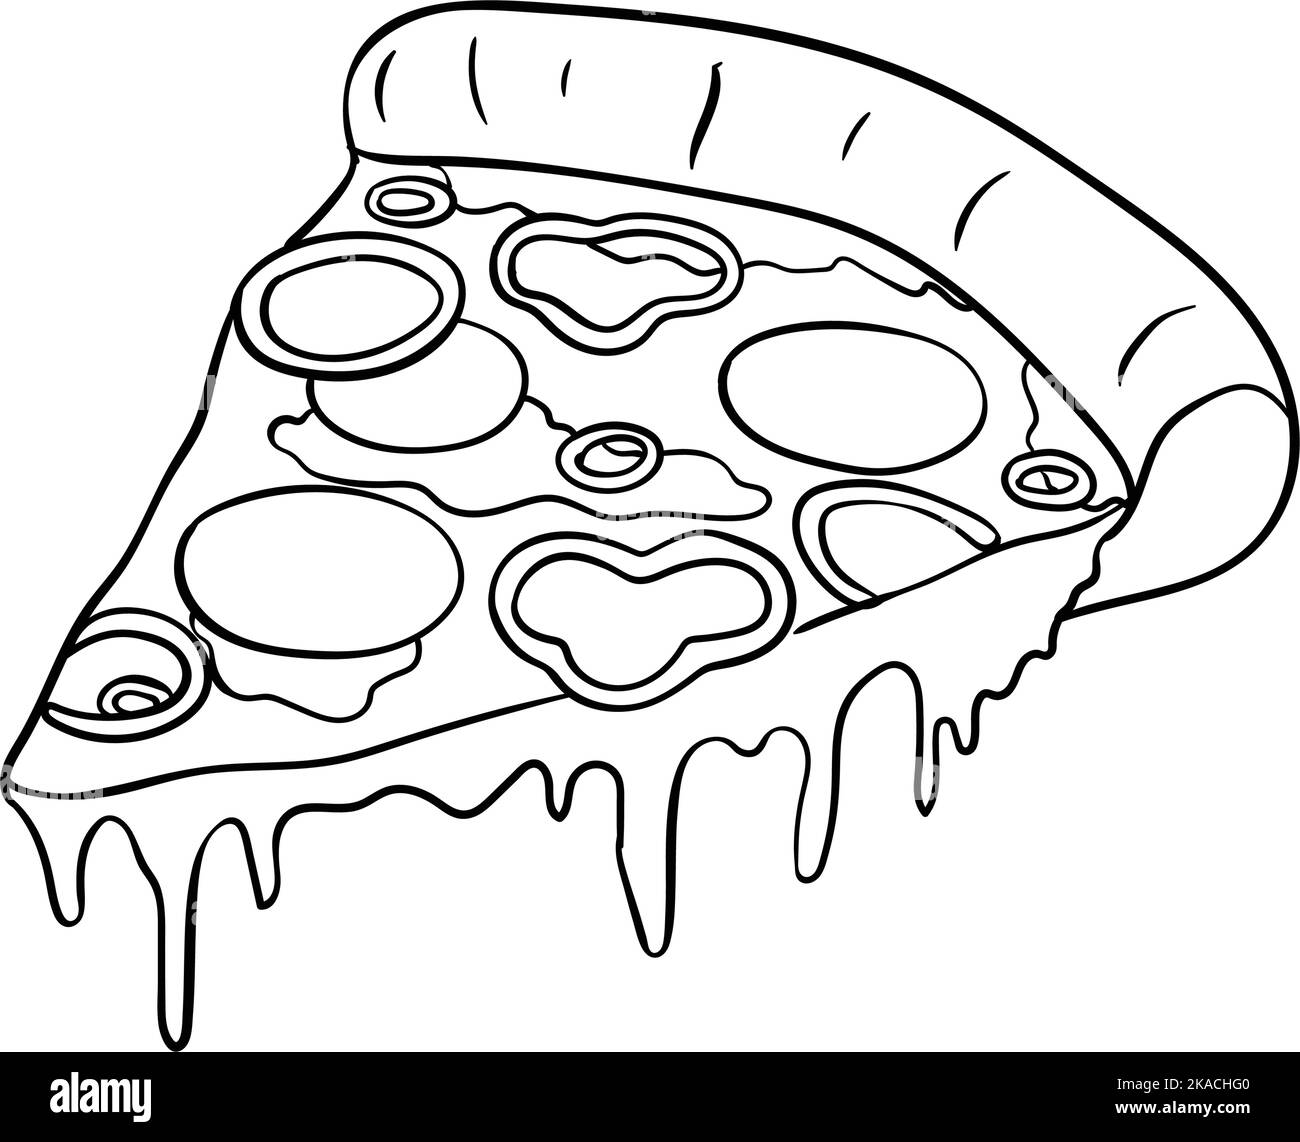 How to Draw a Pizza - Really Easy Drawing Tutorial